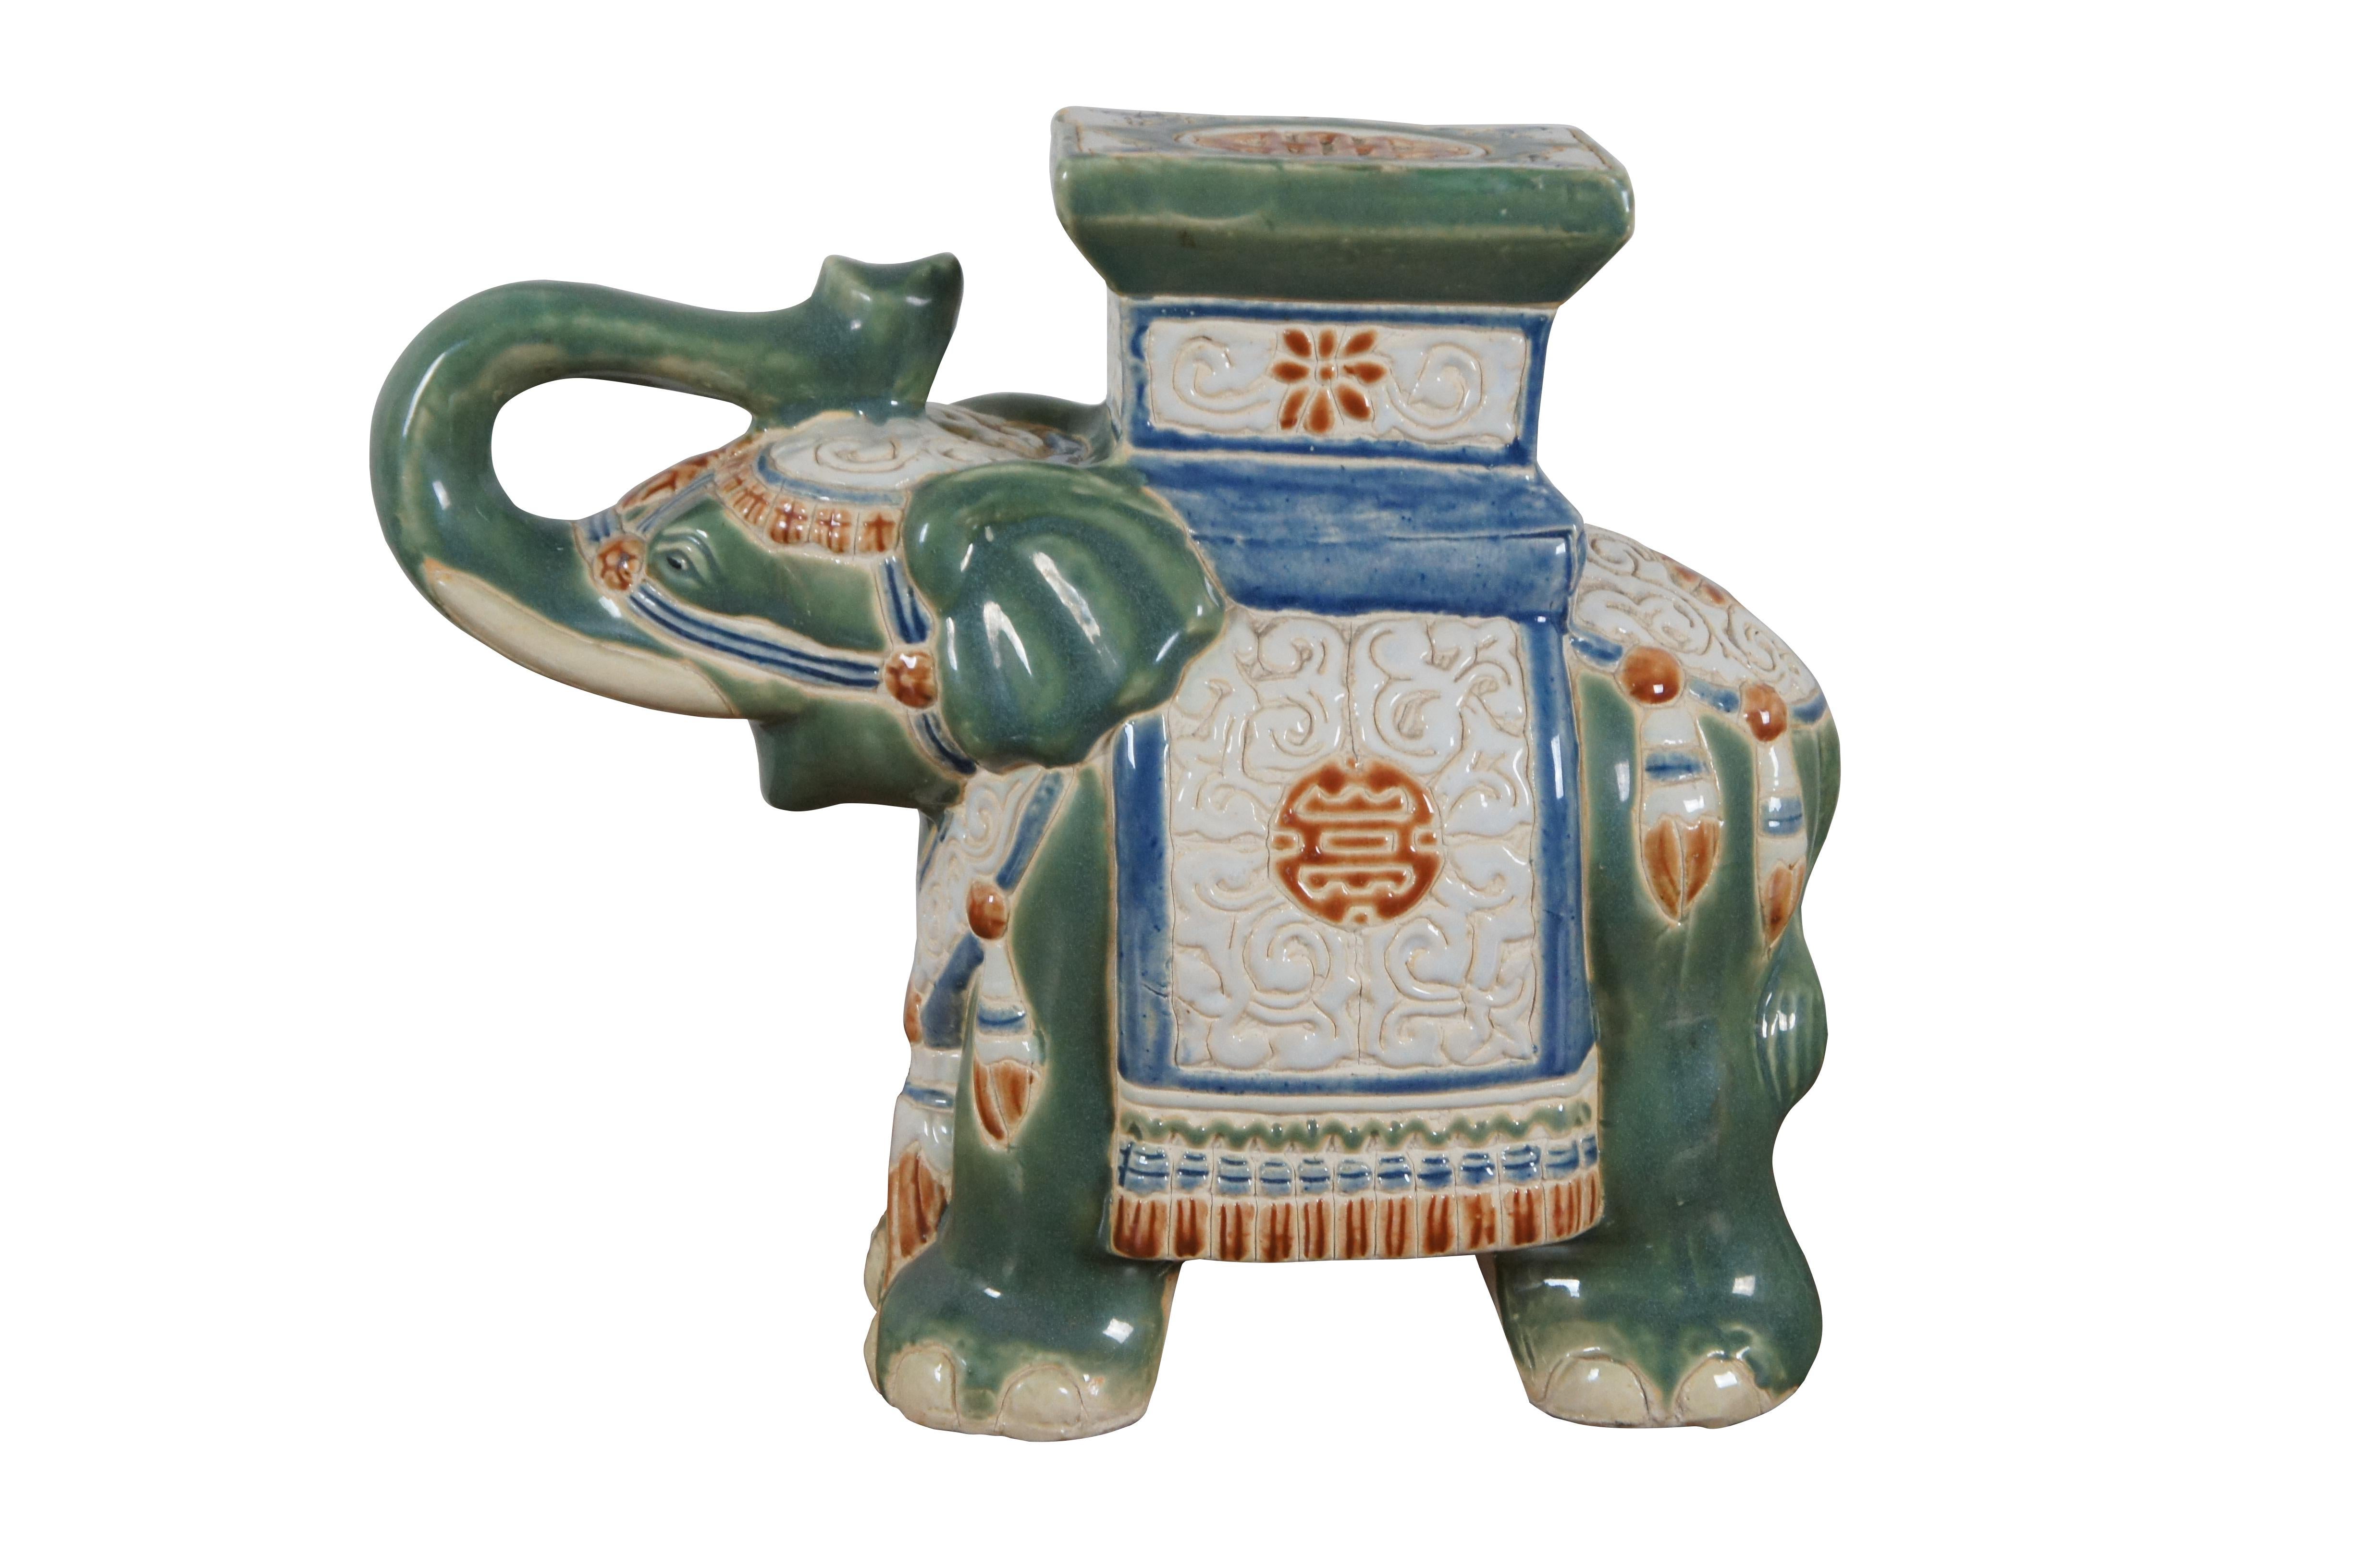 Pair of vintage majolica style ceramic plant / candle stands / garden stools / Bookends in the shape of green Asian elephants with raised trunks, decorated with coverings in white, blue, and orange. 

Dimensions:
13.5